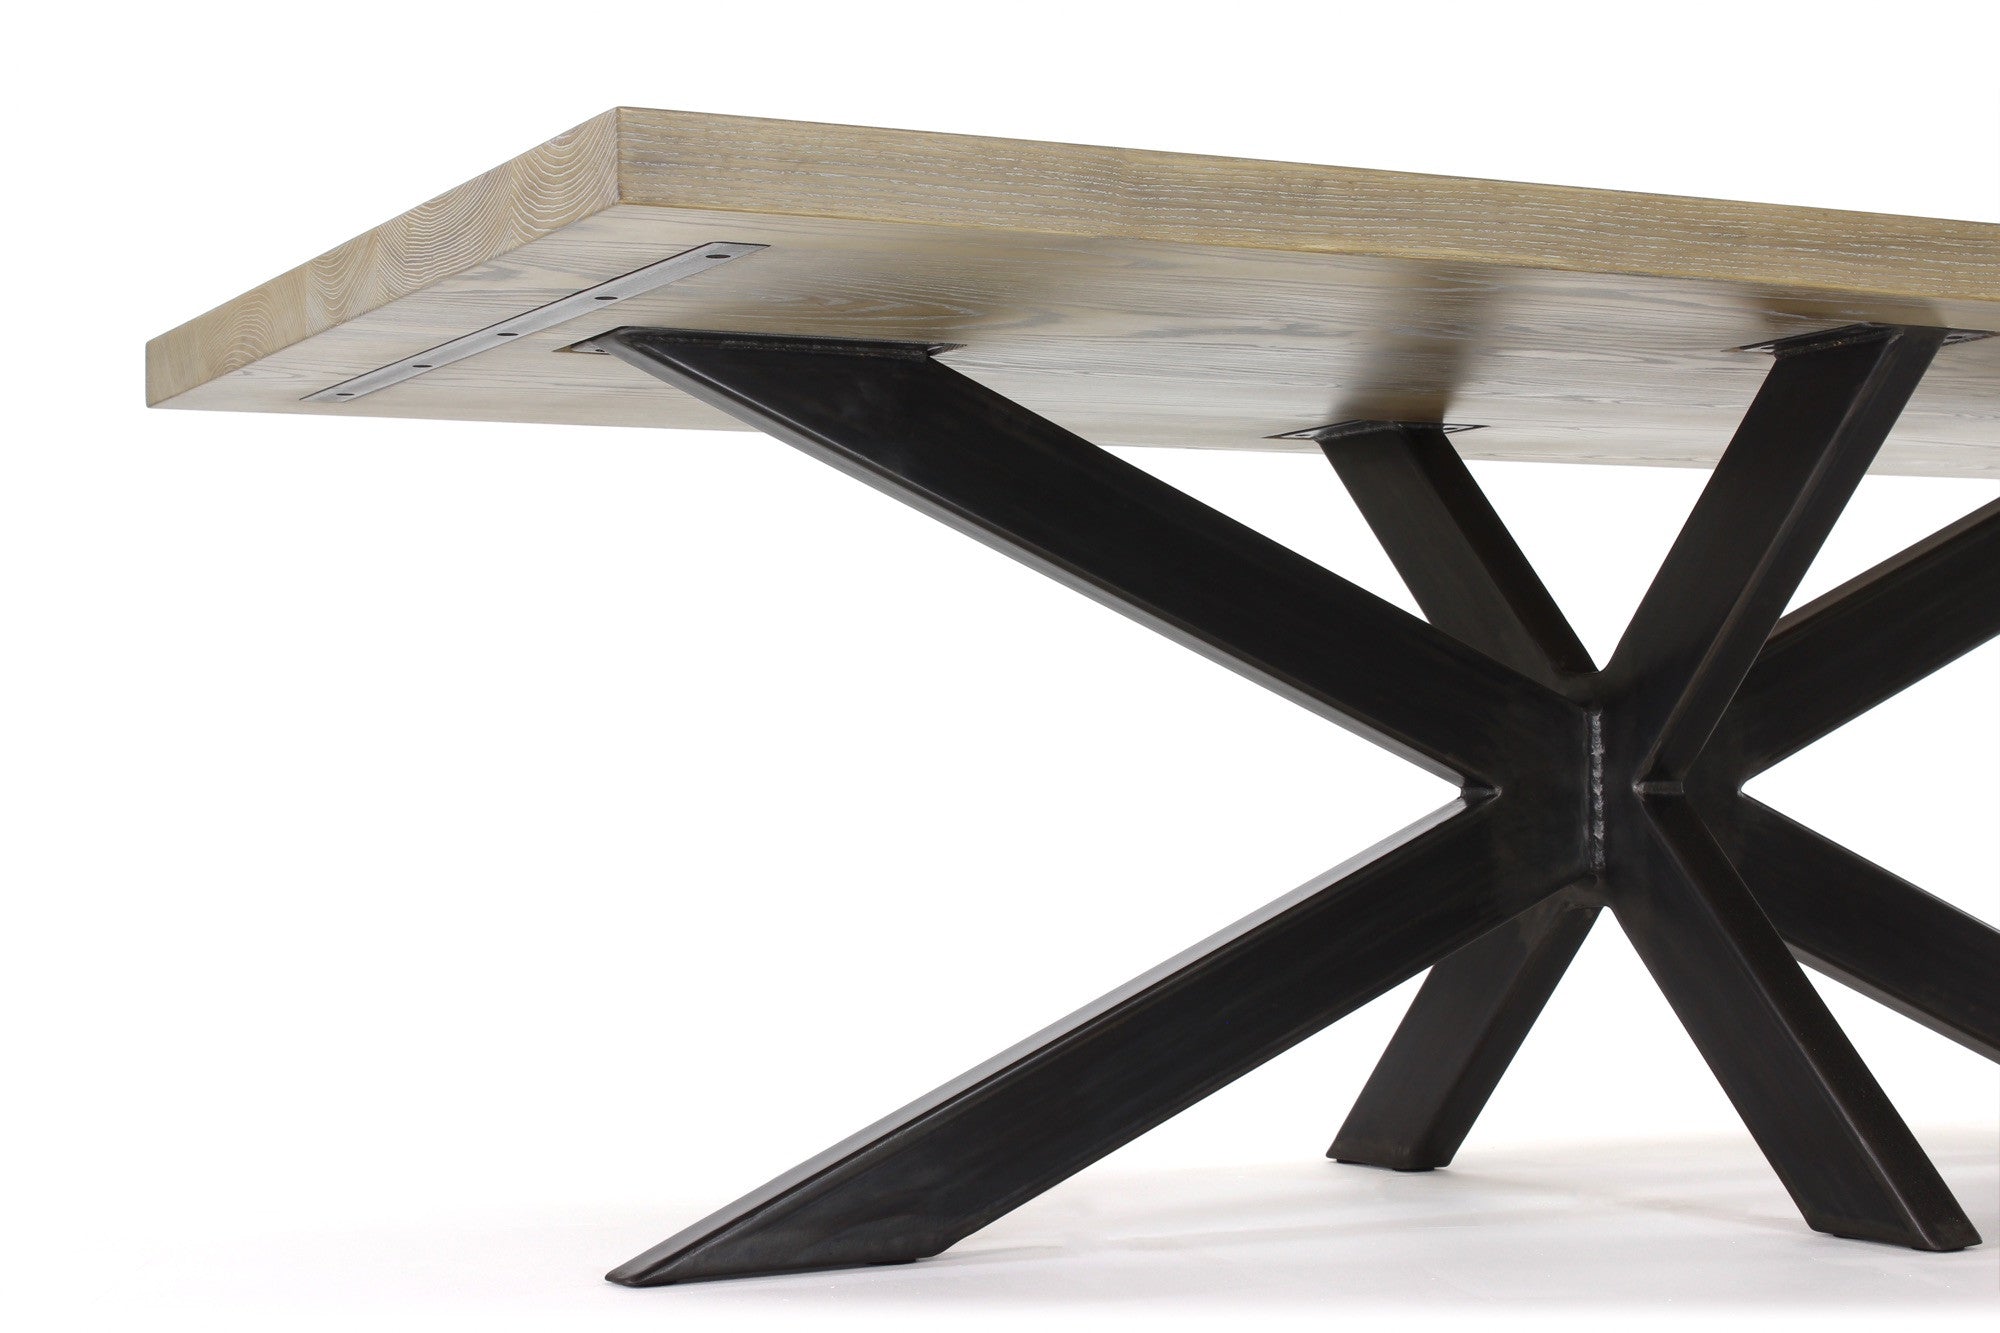 6' long jak dining table | cerused ash wood finish with waxed steel